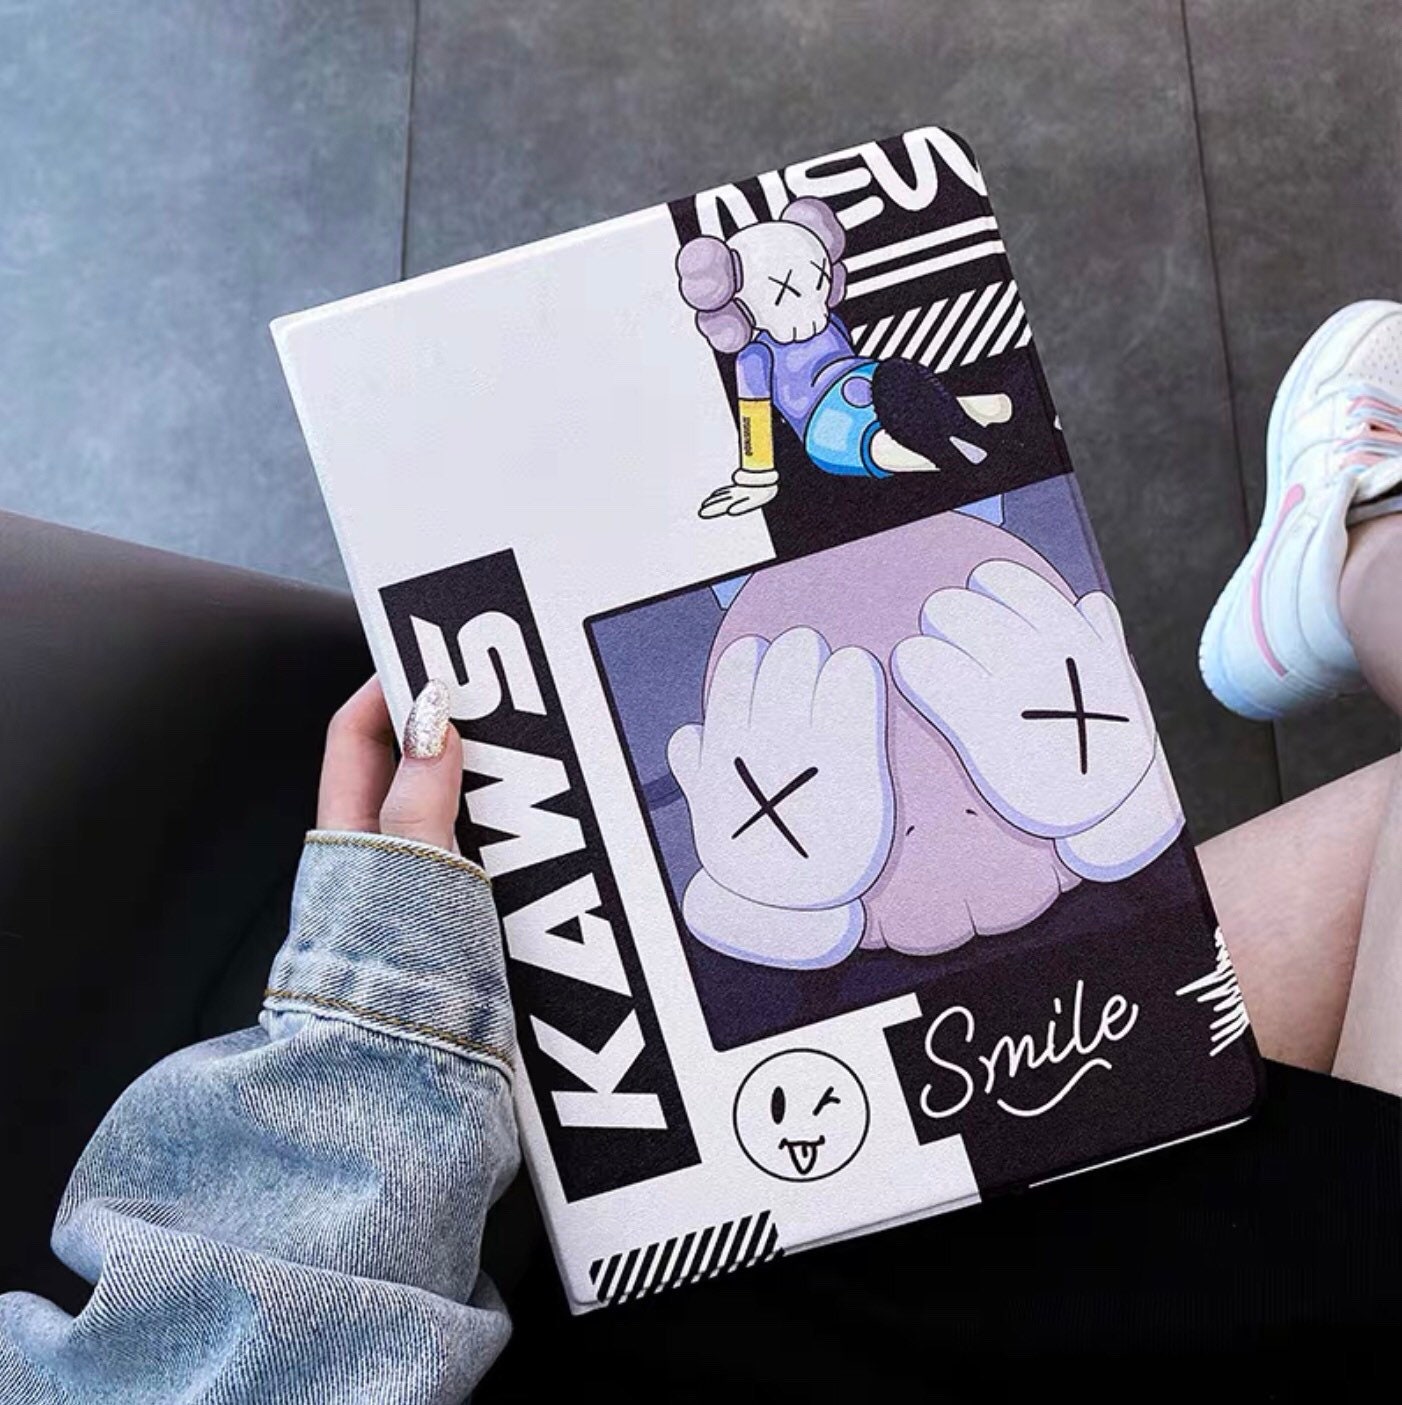 Kaws Mobile Stickers Pack of 40 – Stickerly